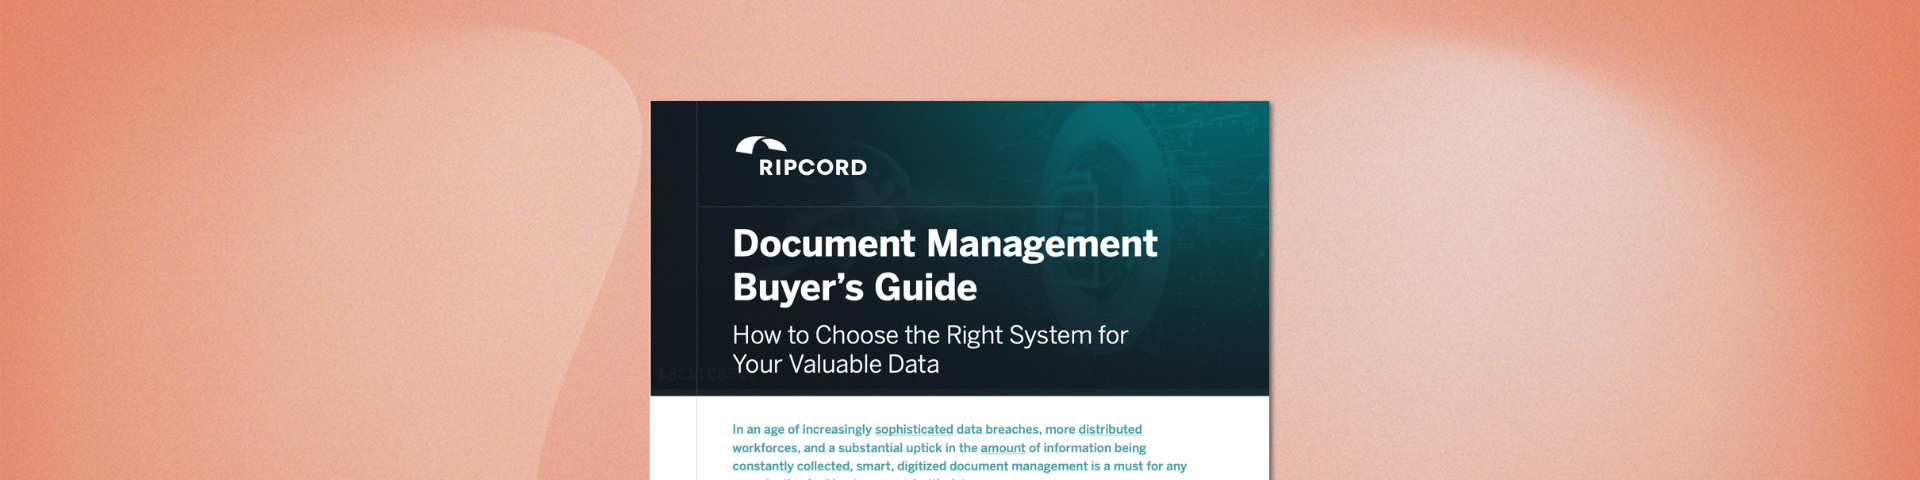 Document Management Buyer’s Guide eBook - Ripcord (1)